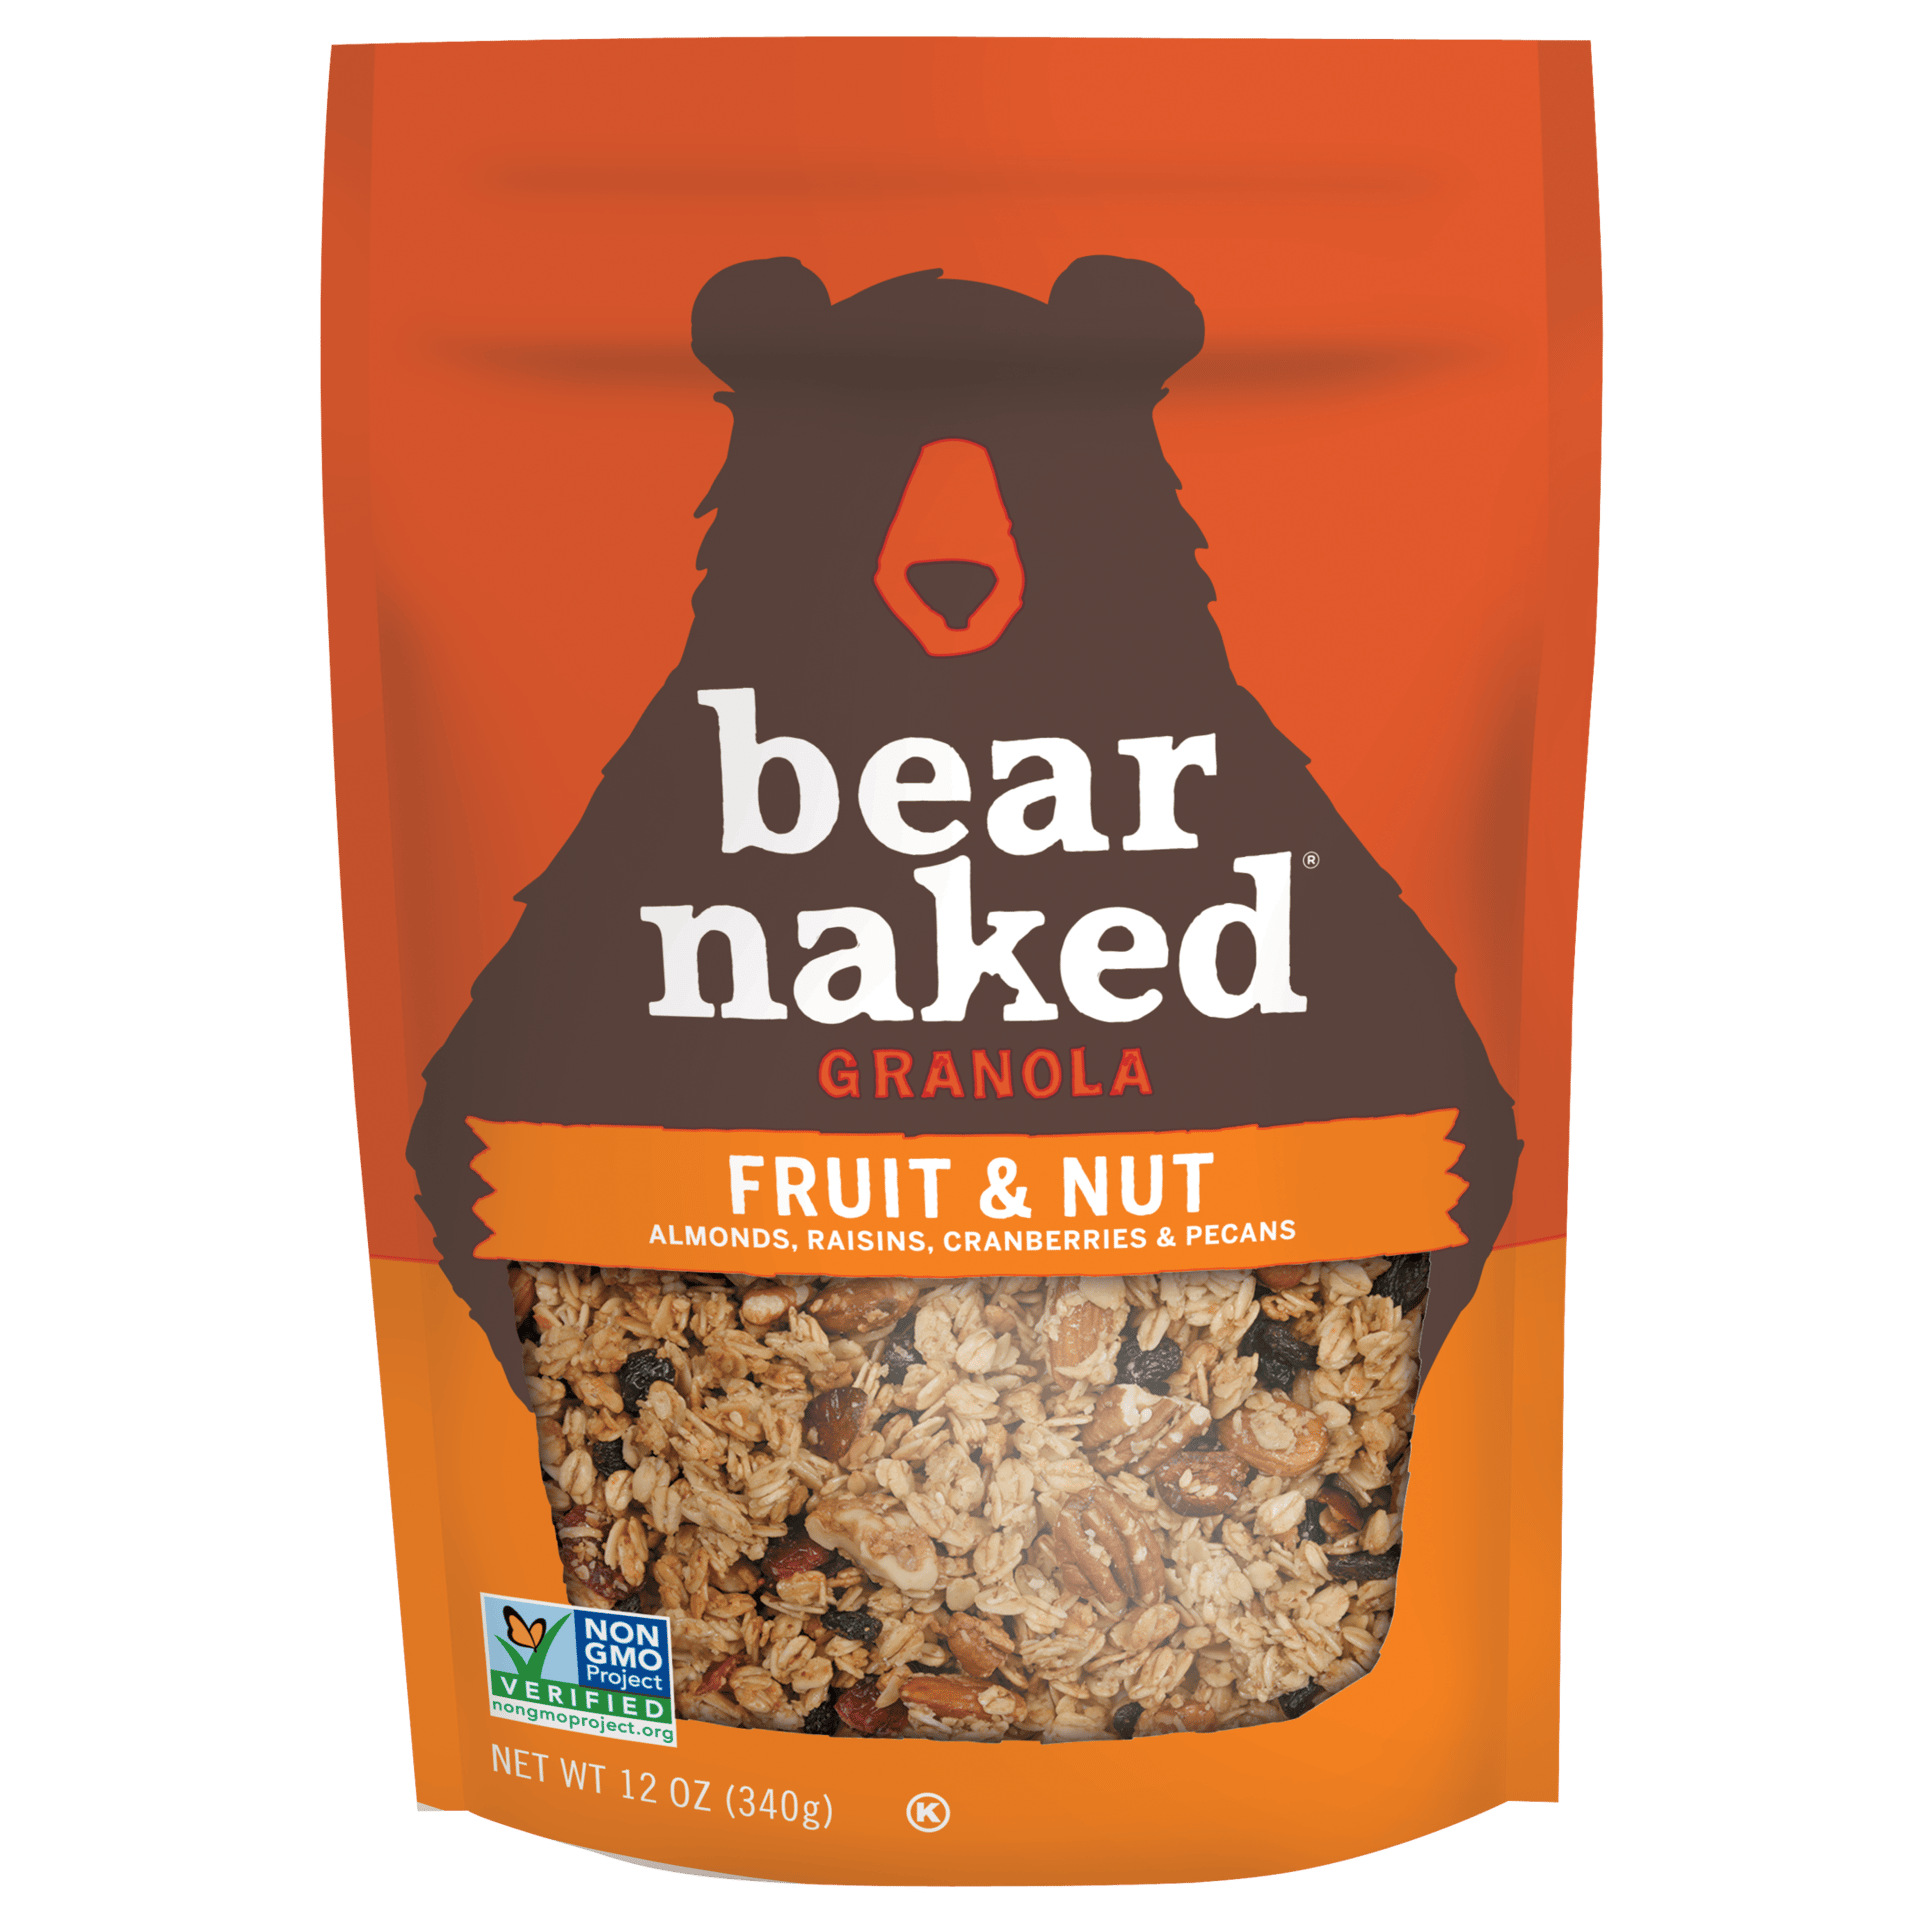 Packaging and labeling, Brown, Orange, Bear, Granola, Stand-up pouch